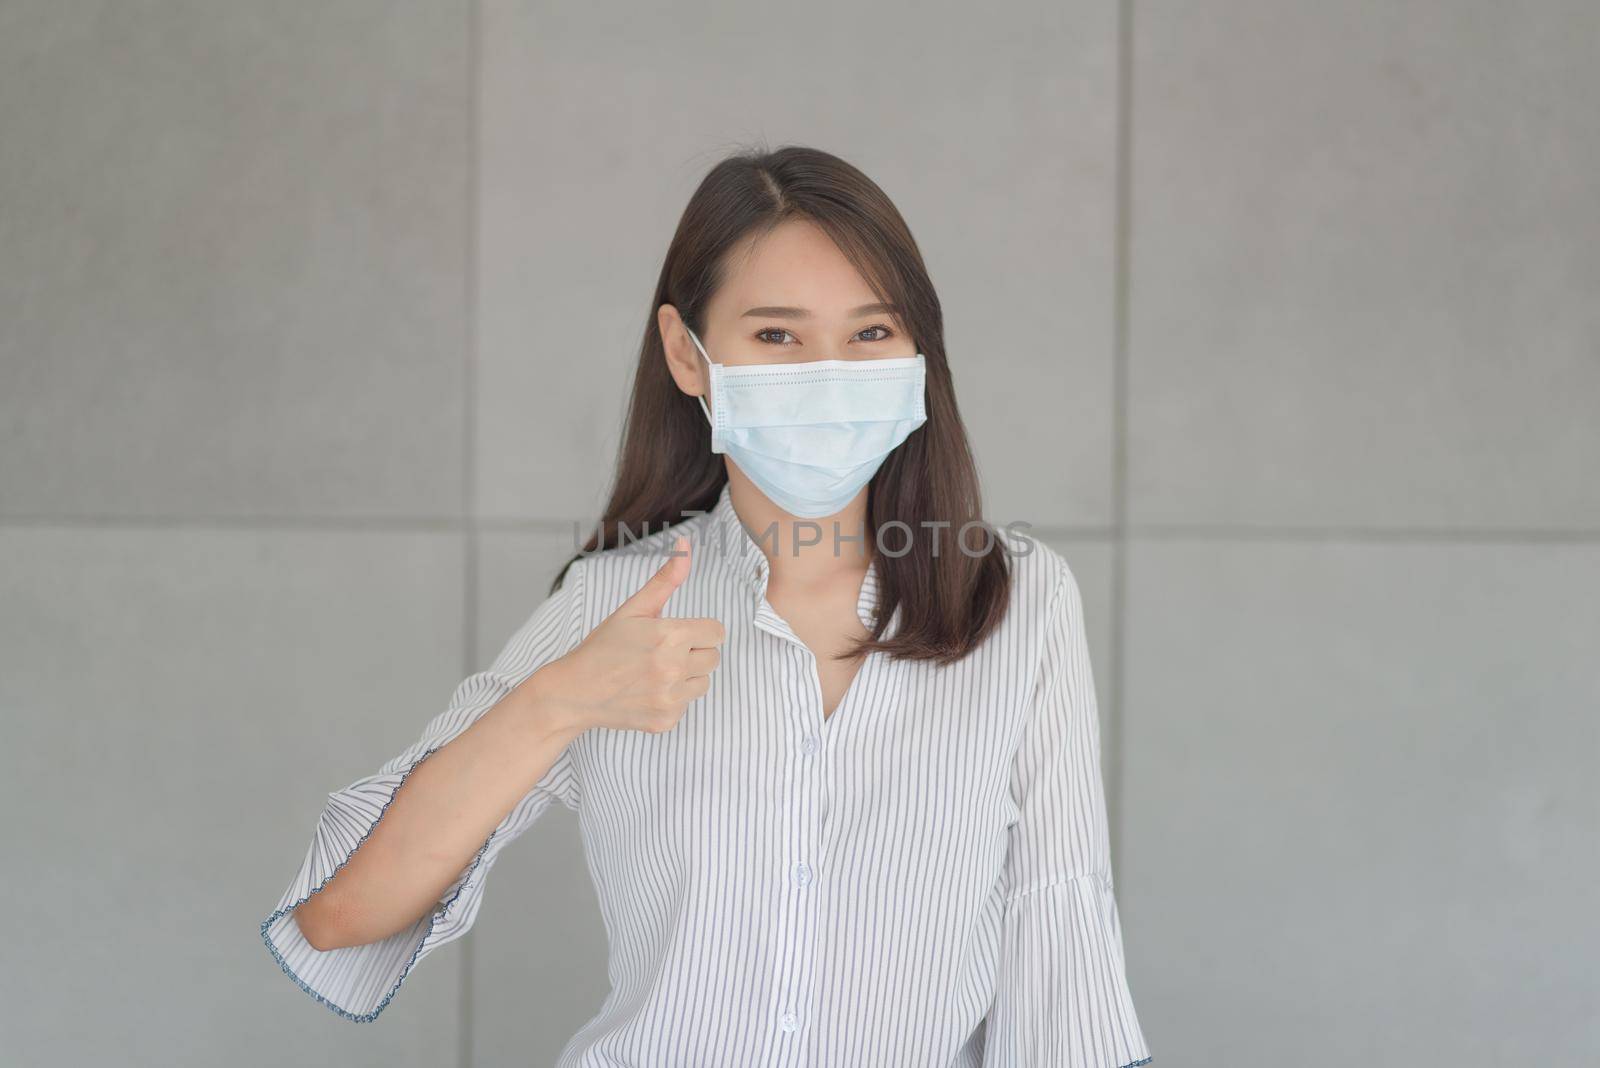 Business employee wearing mask during work in office to keep hygiene follow company policy by Nuamfolio